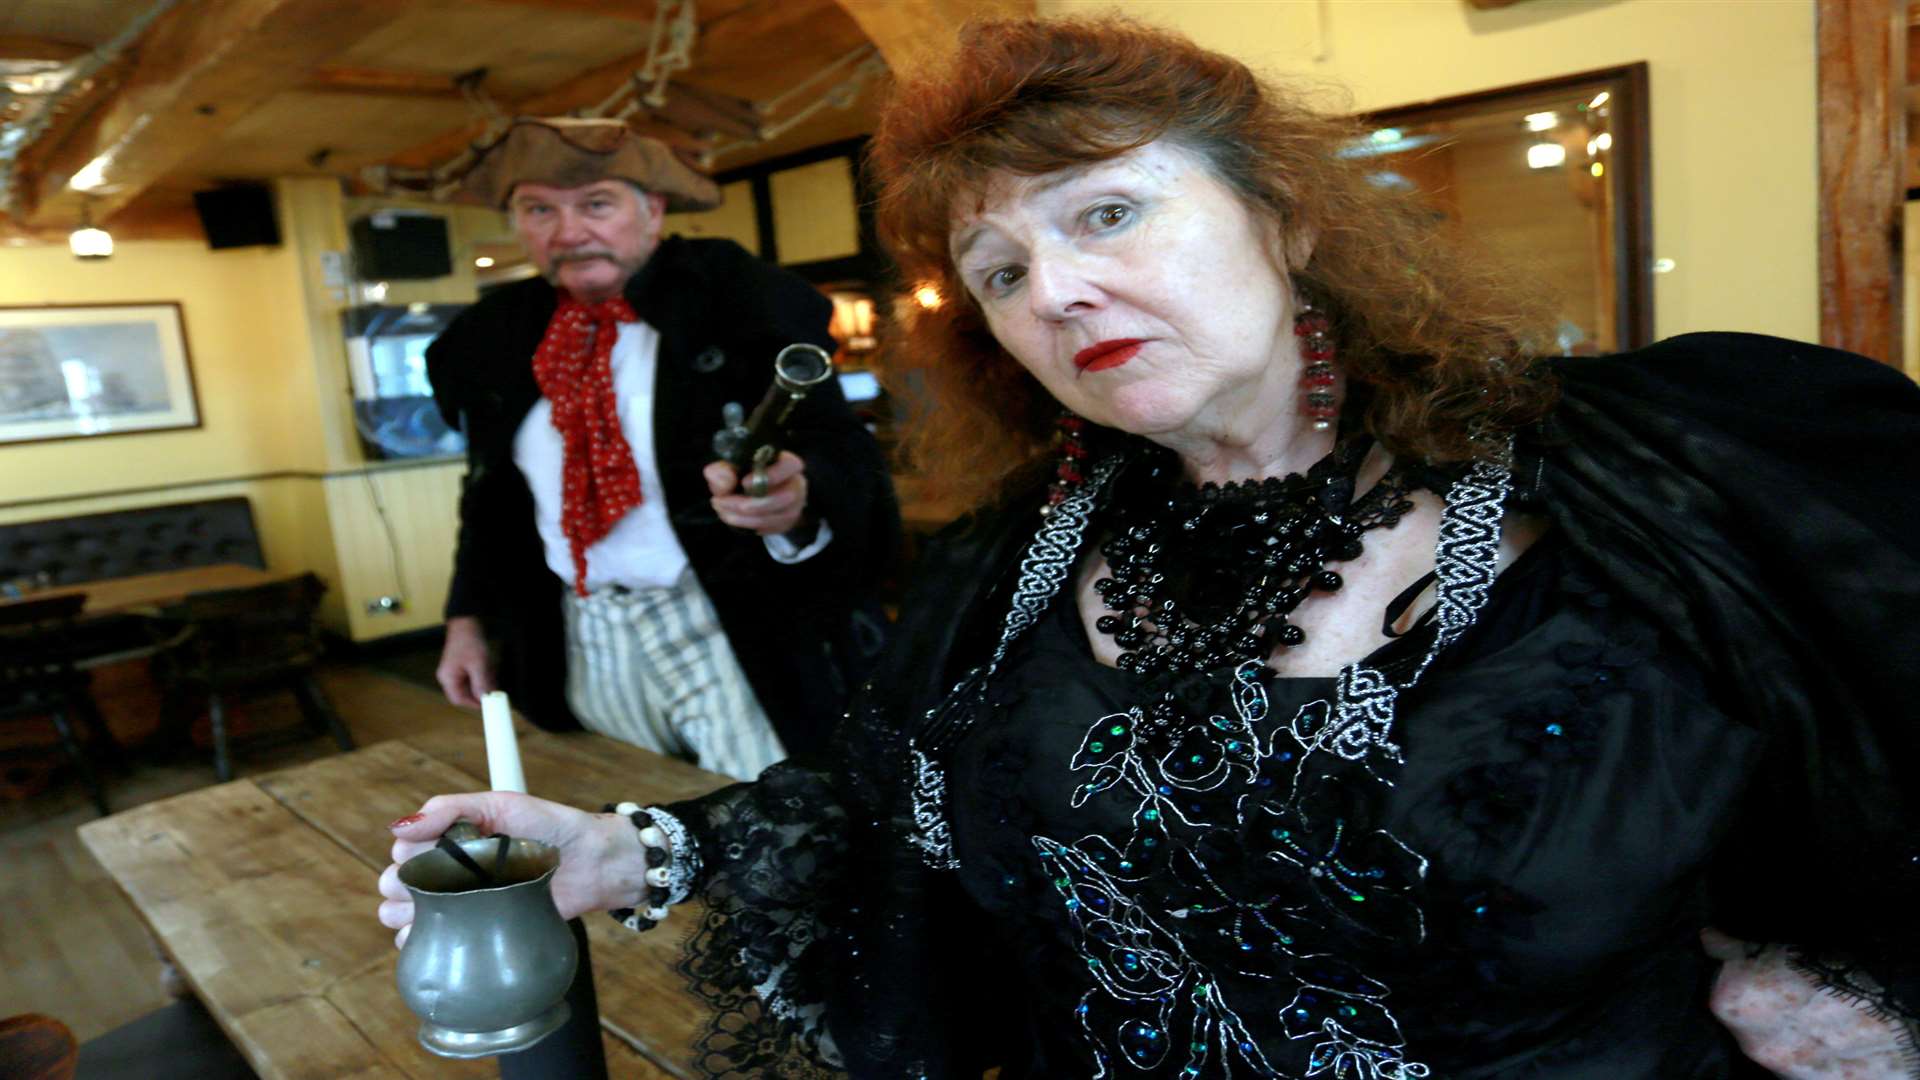 A murder mystery is going to be performed at the Flying Dutchman Pub in Queenborough